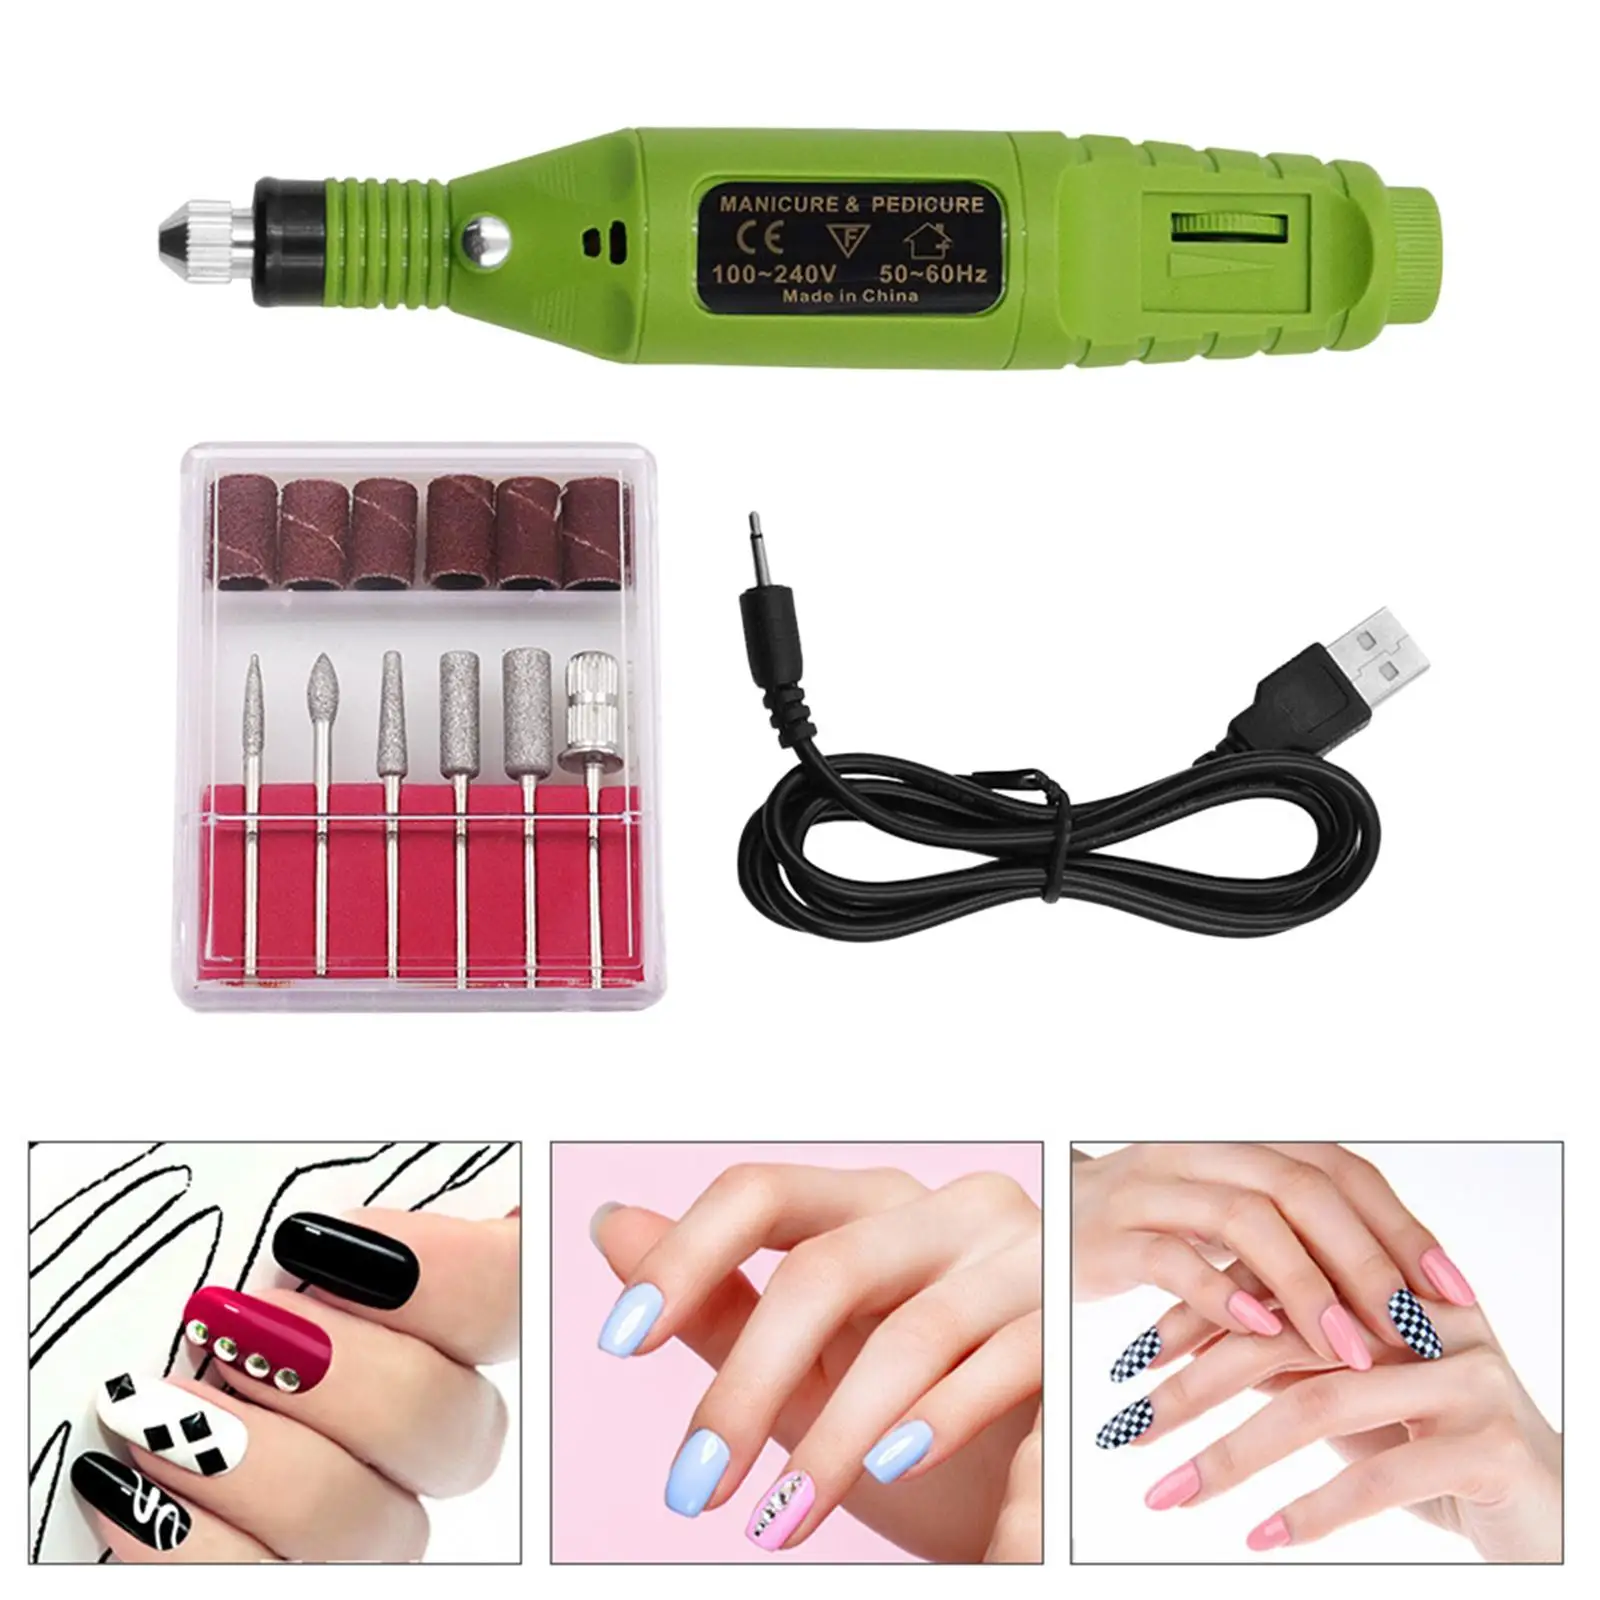 2000RPM Portable Nail Drill Pen Sander Acrylic Gel Removal Nails Art Tools for Milling Exfoliating Engraving